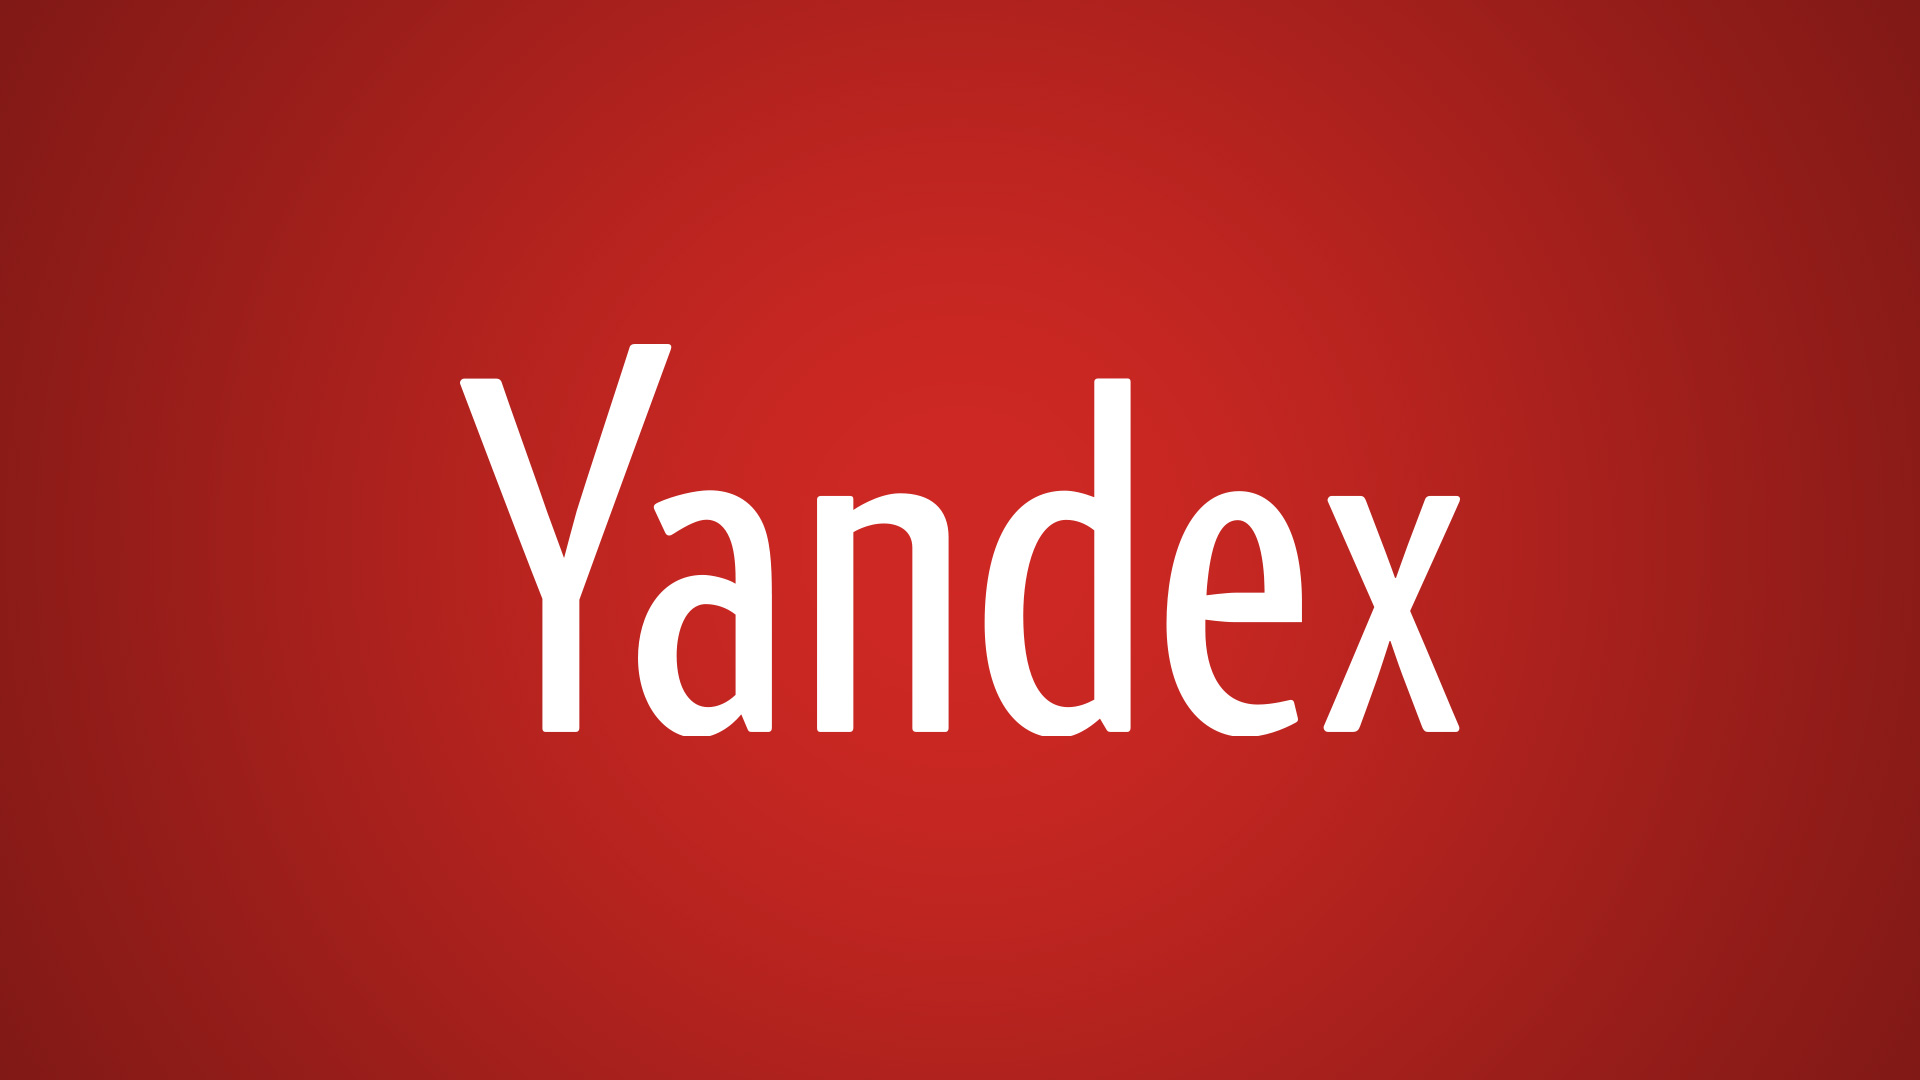 Yandex Images search for images online image search